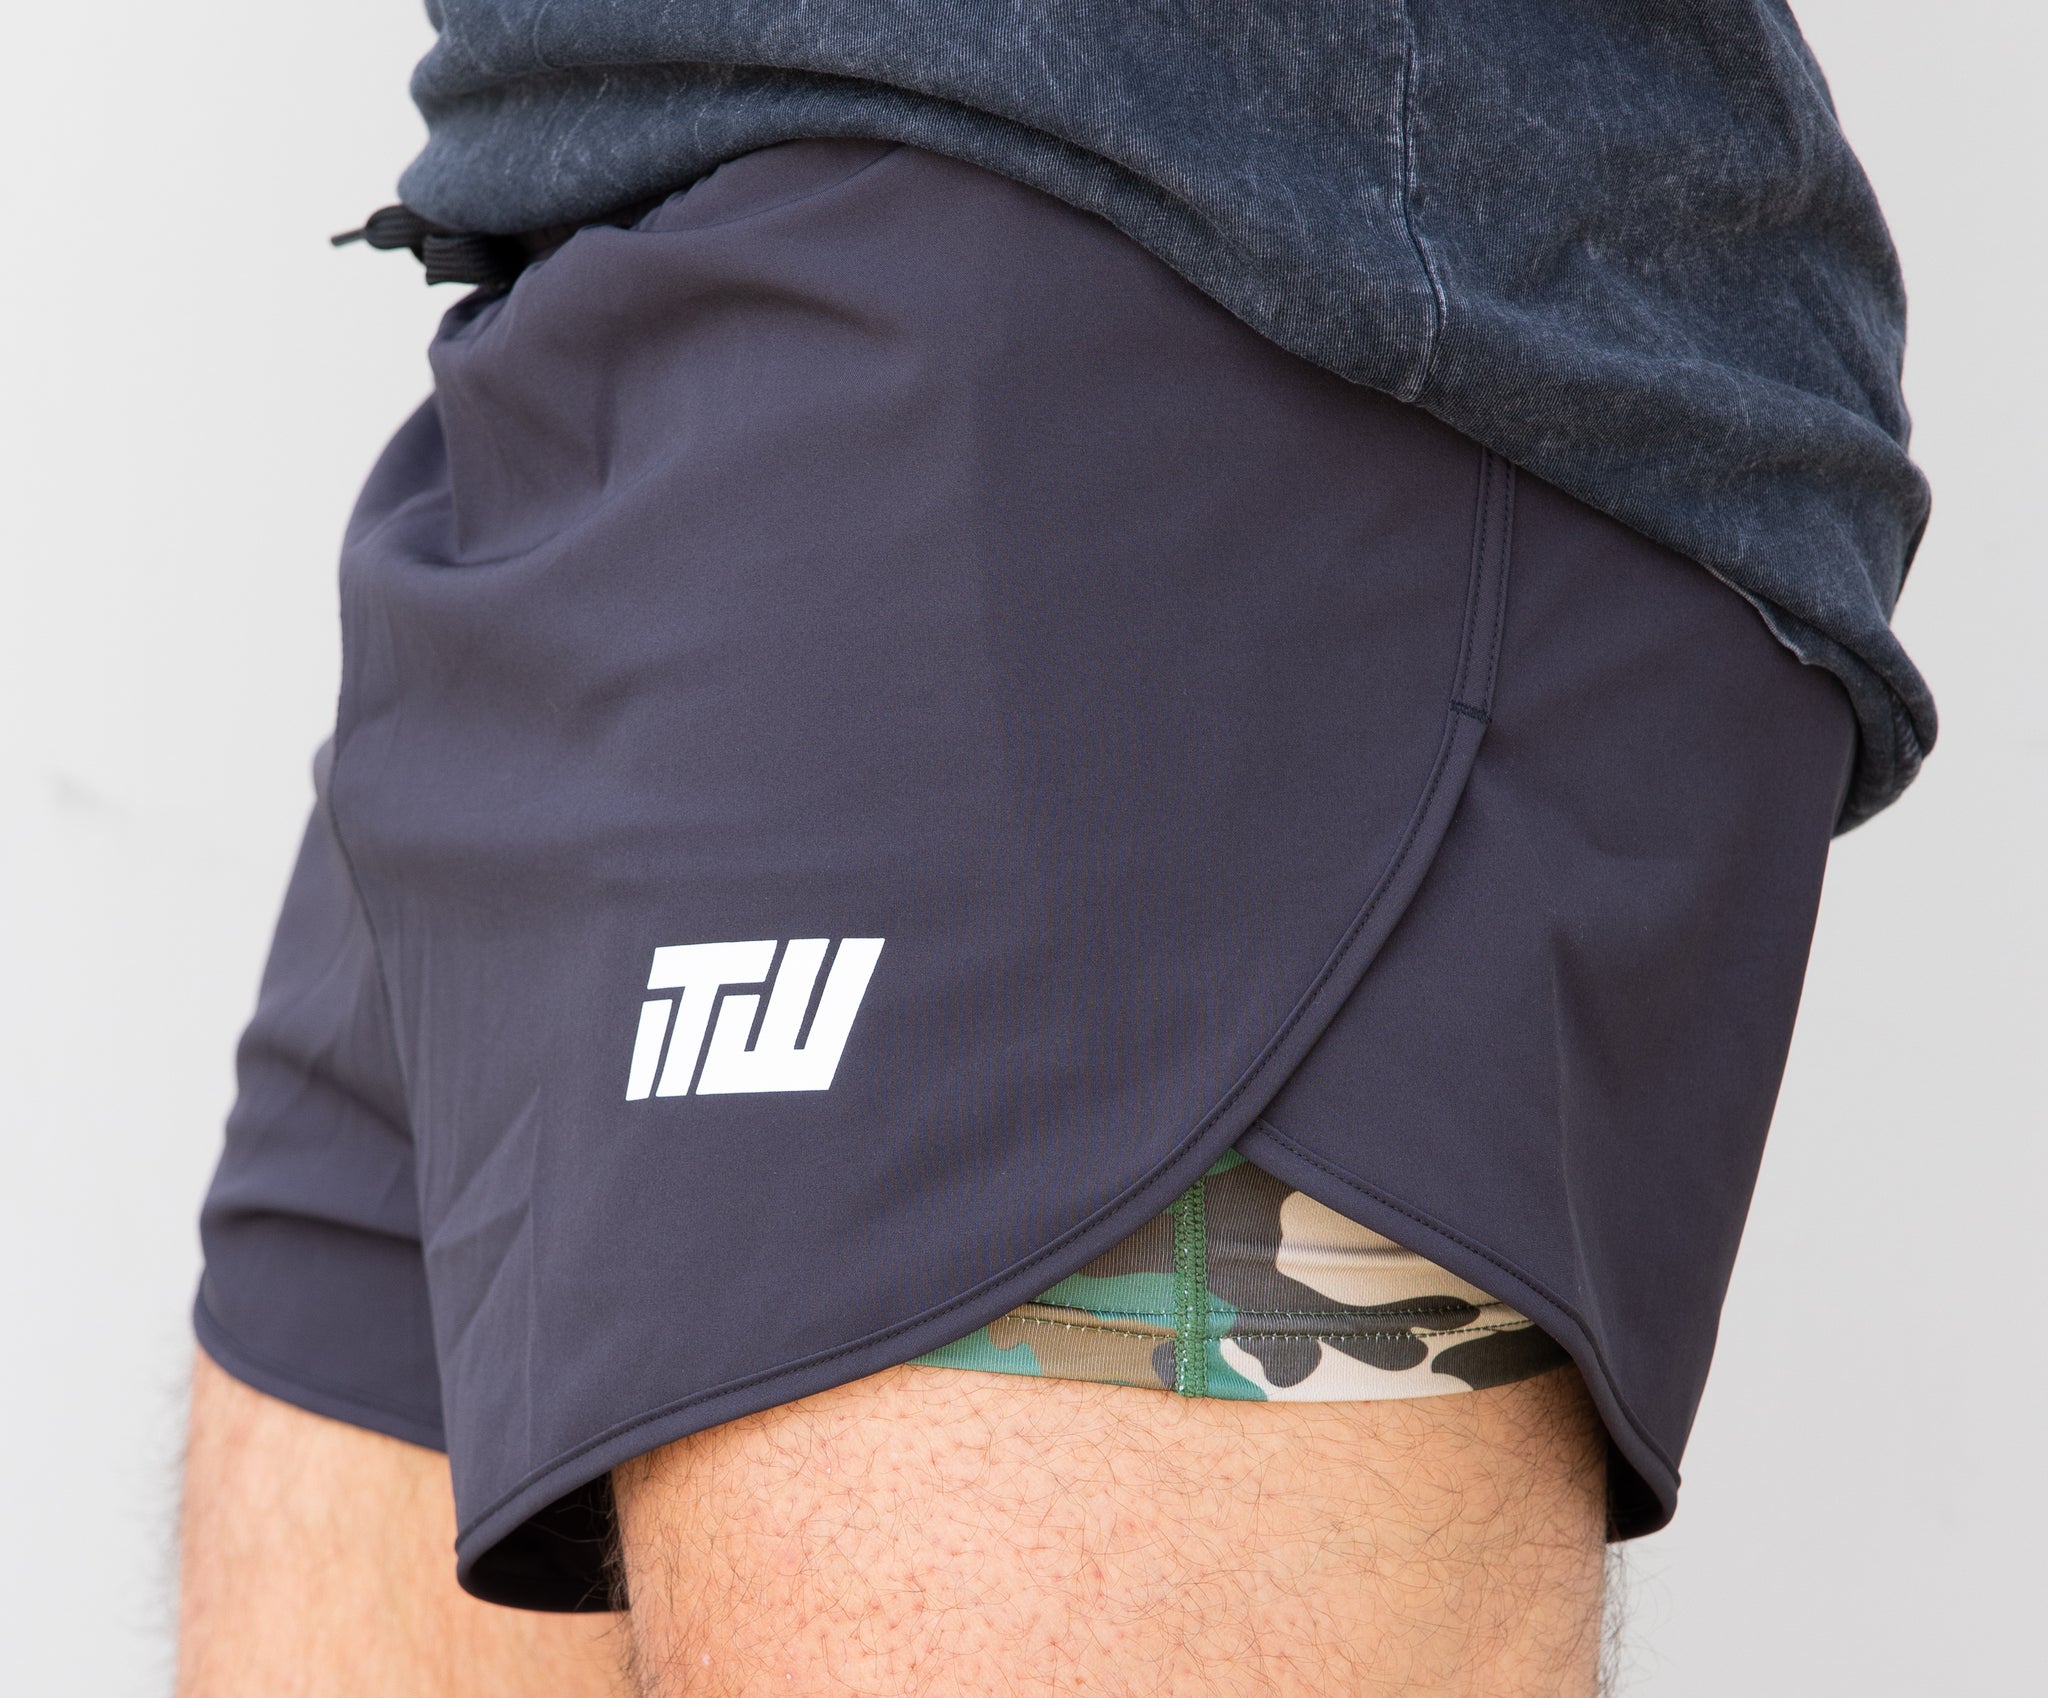 ITW LEGacy "Woodie" Shorts